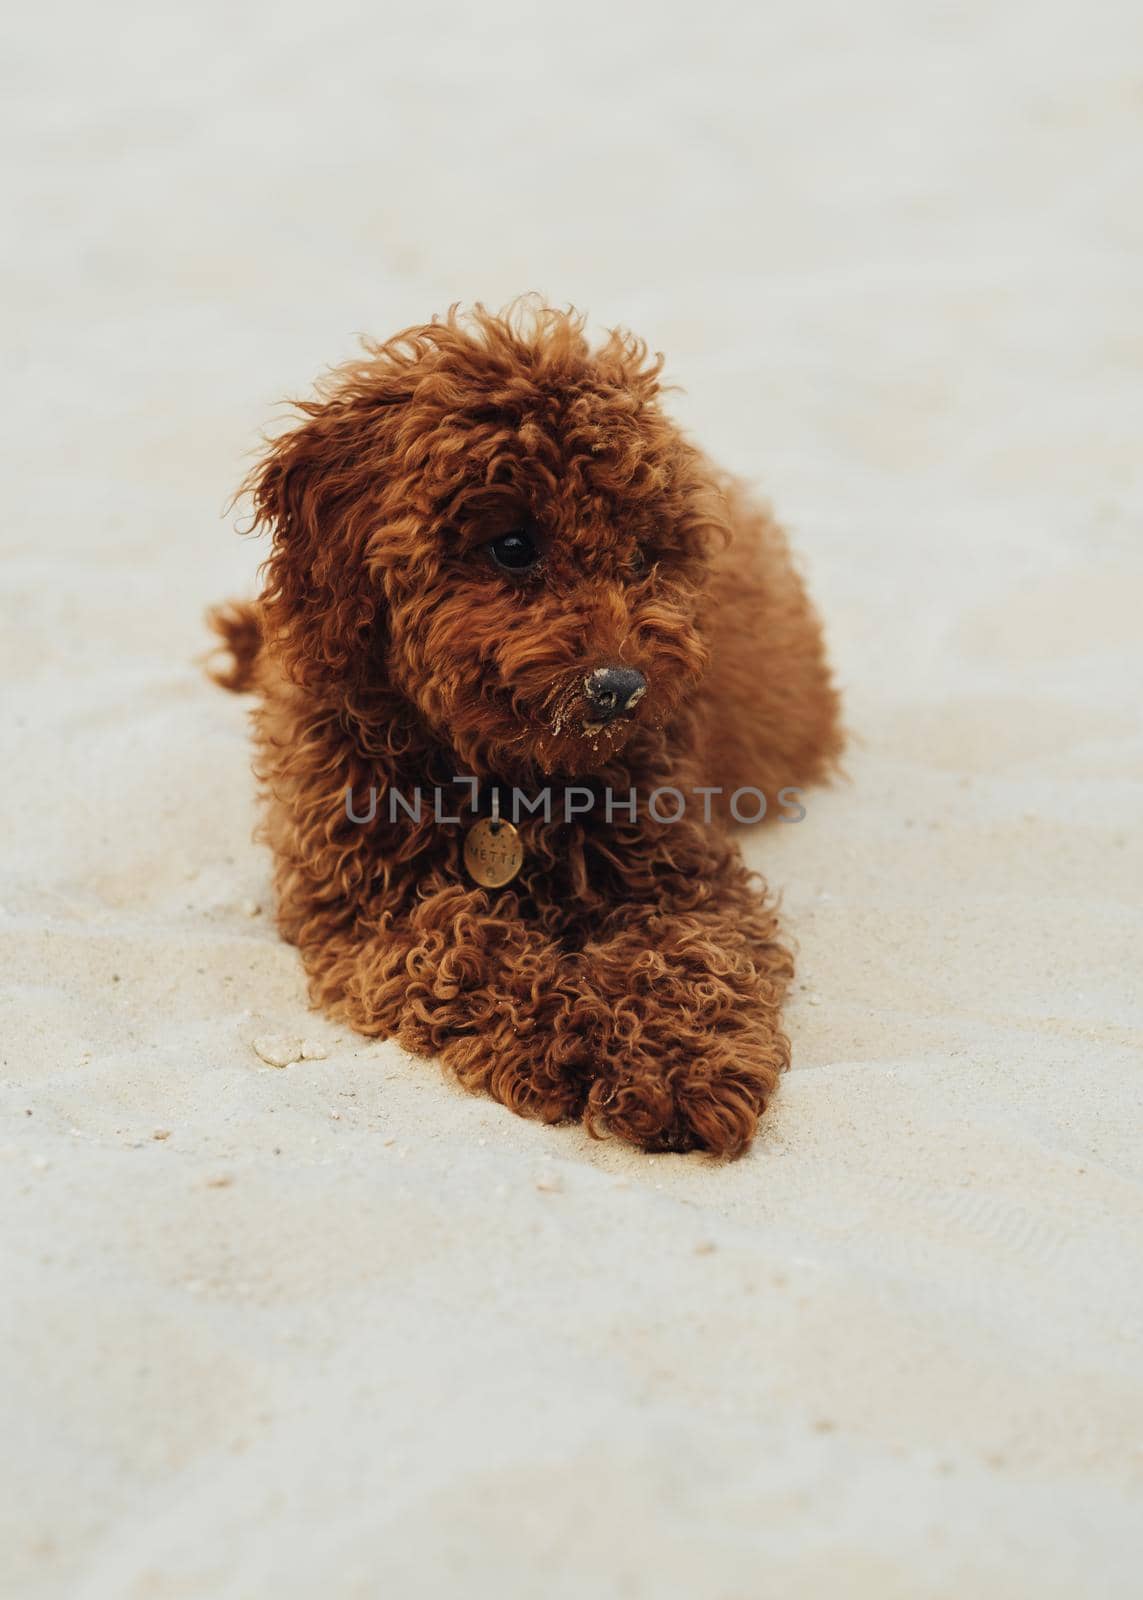 Beautiful Redhead Dog, Toy Poodle Breed Called Metti Laying on Sand Outdoors